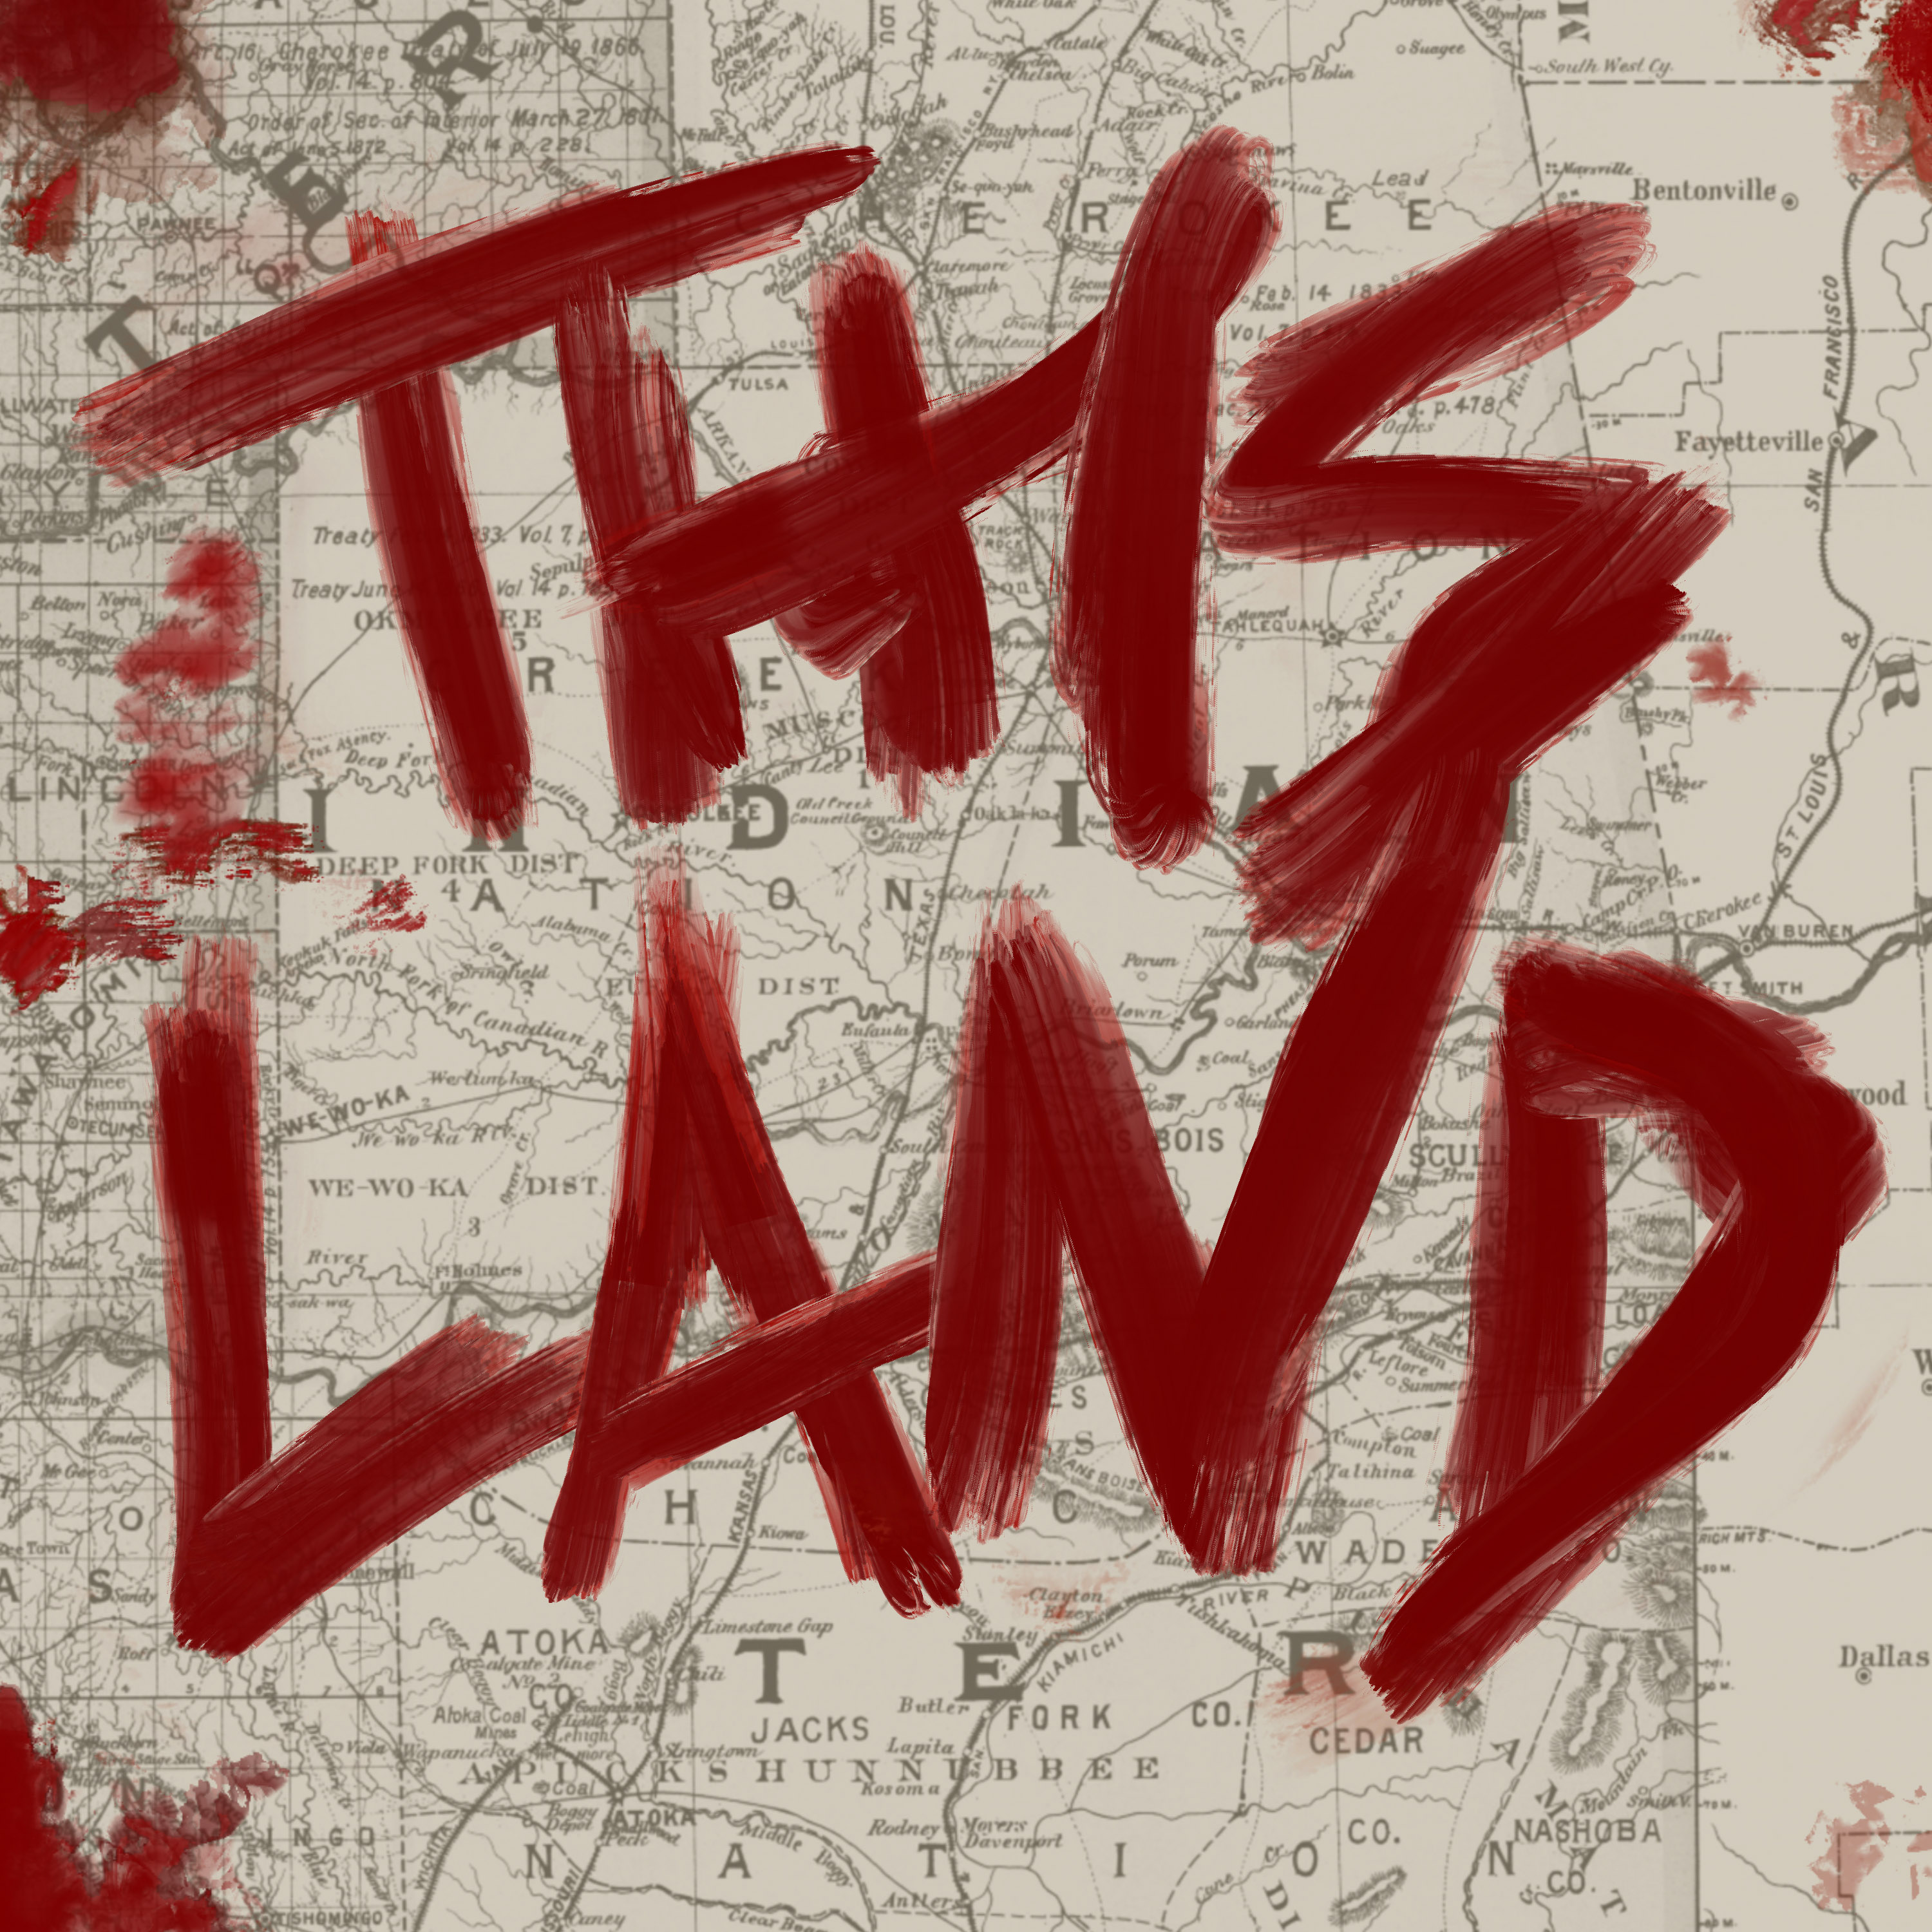 Bold red strokes spelling 'this land' over a vintage map background, evoking themes of territory and ownership.